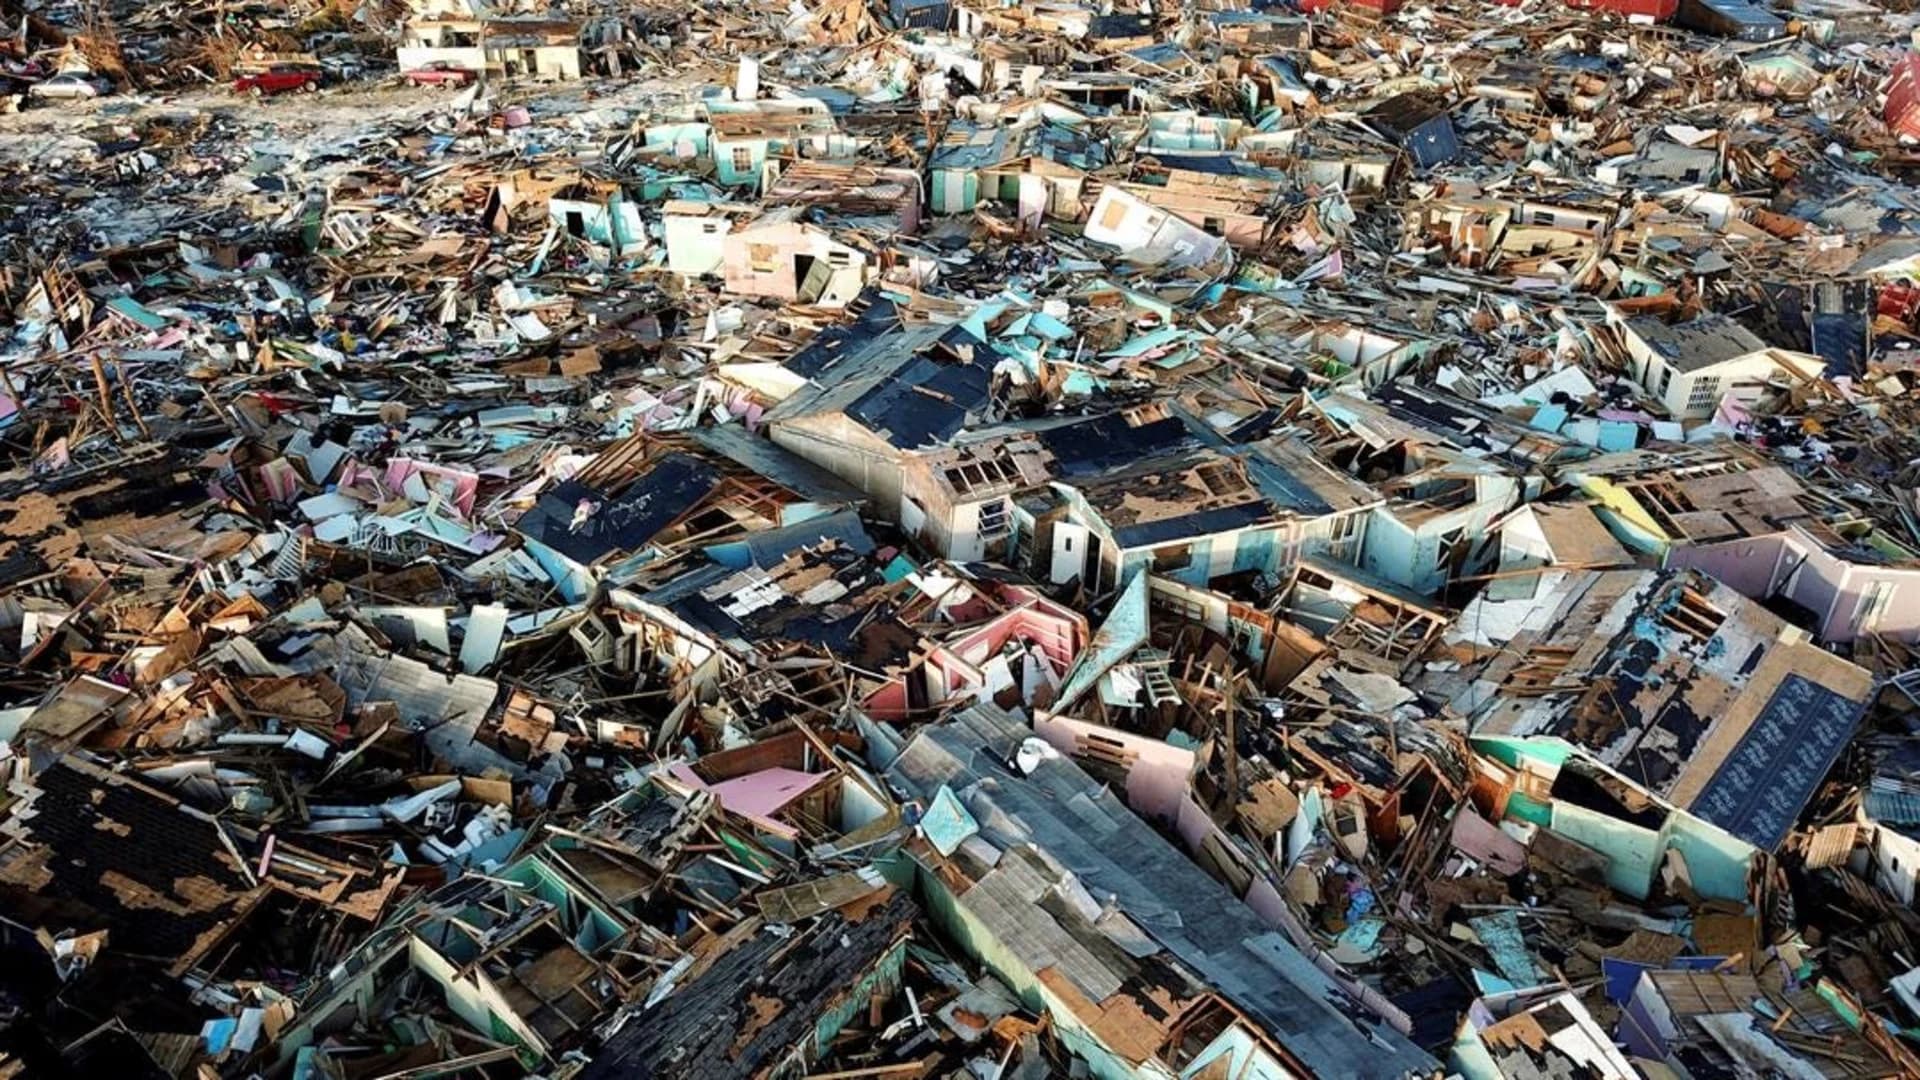 These photos show the devastation that Hurricane Dorian brought to the Bahamas